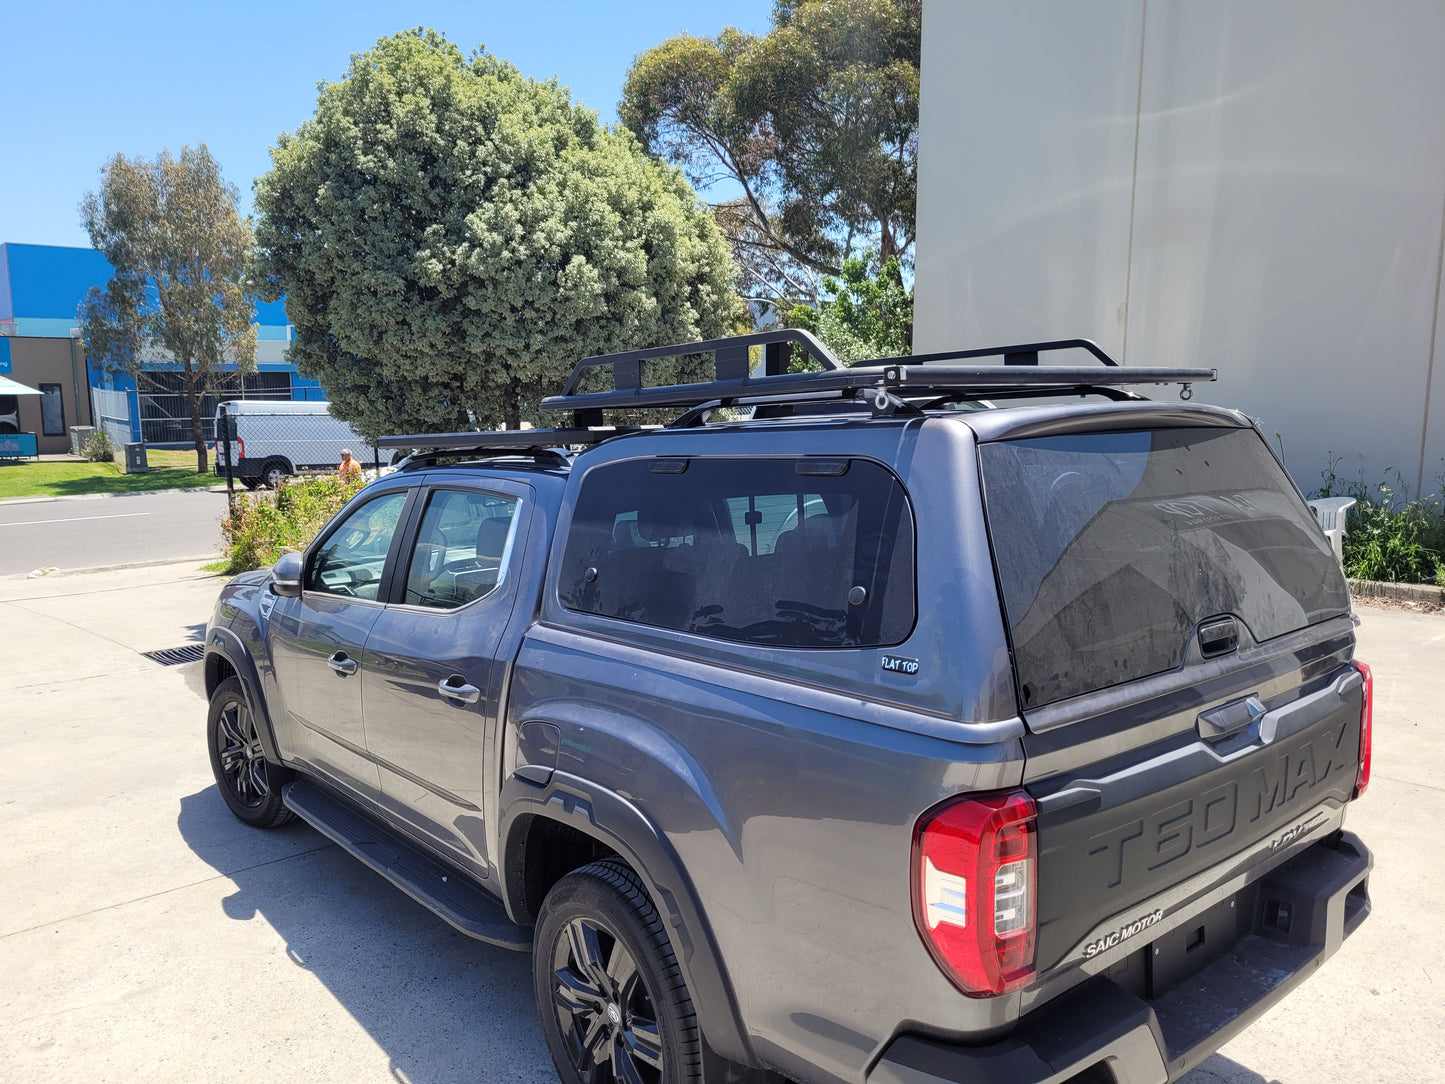 GWM Canopy TL 1  -s  Executive  For Dual Cab  Utes